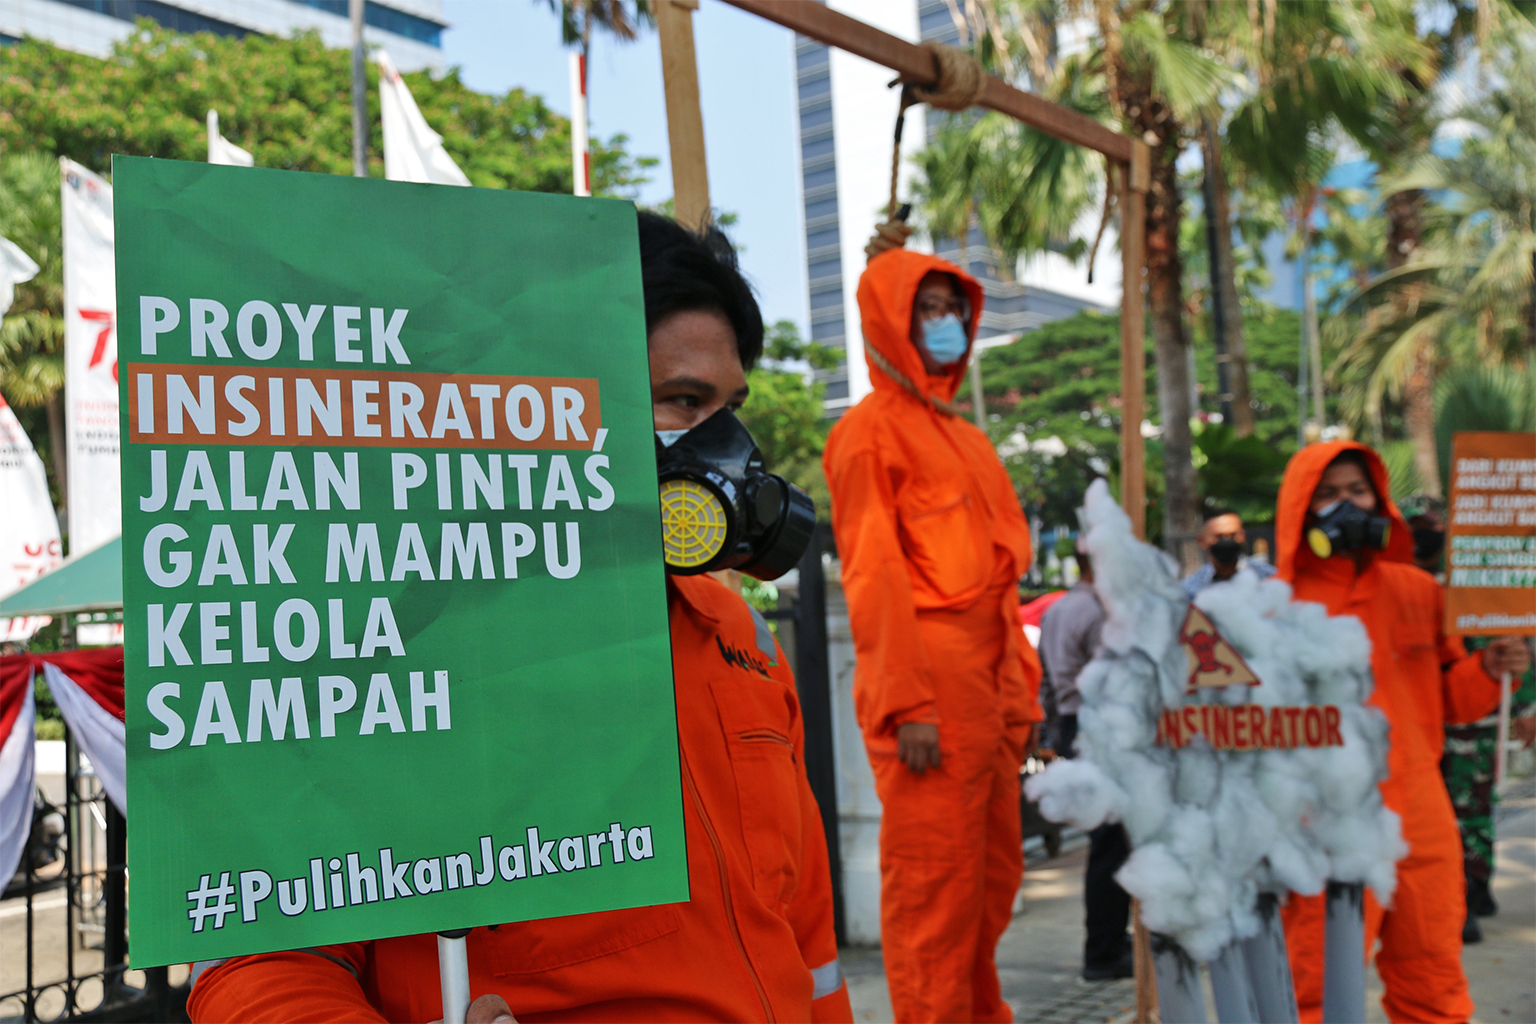 A protest organized against the proposed incinerator in Jakarta.